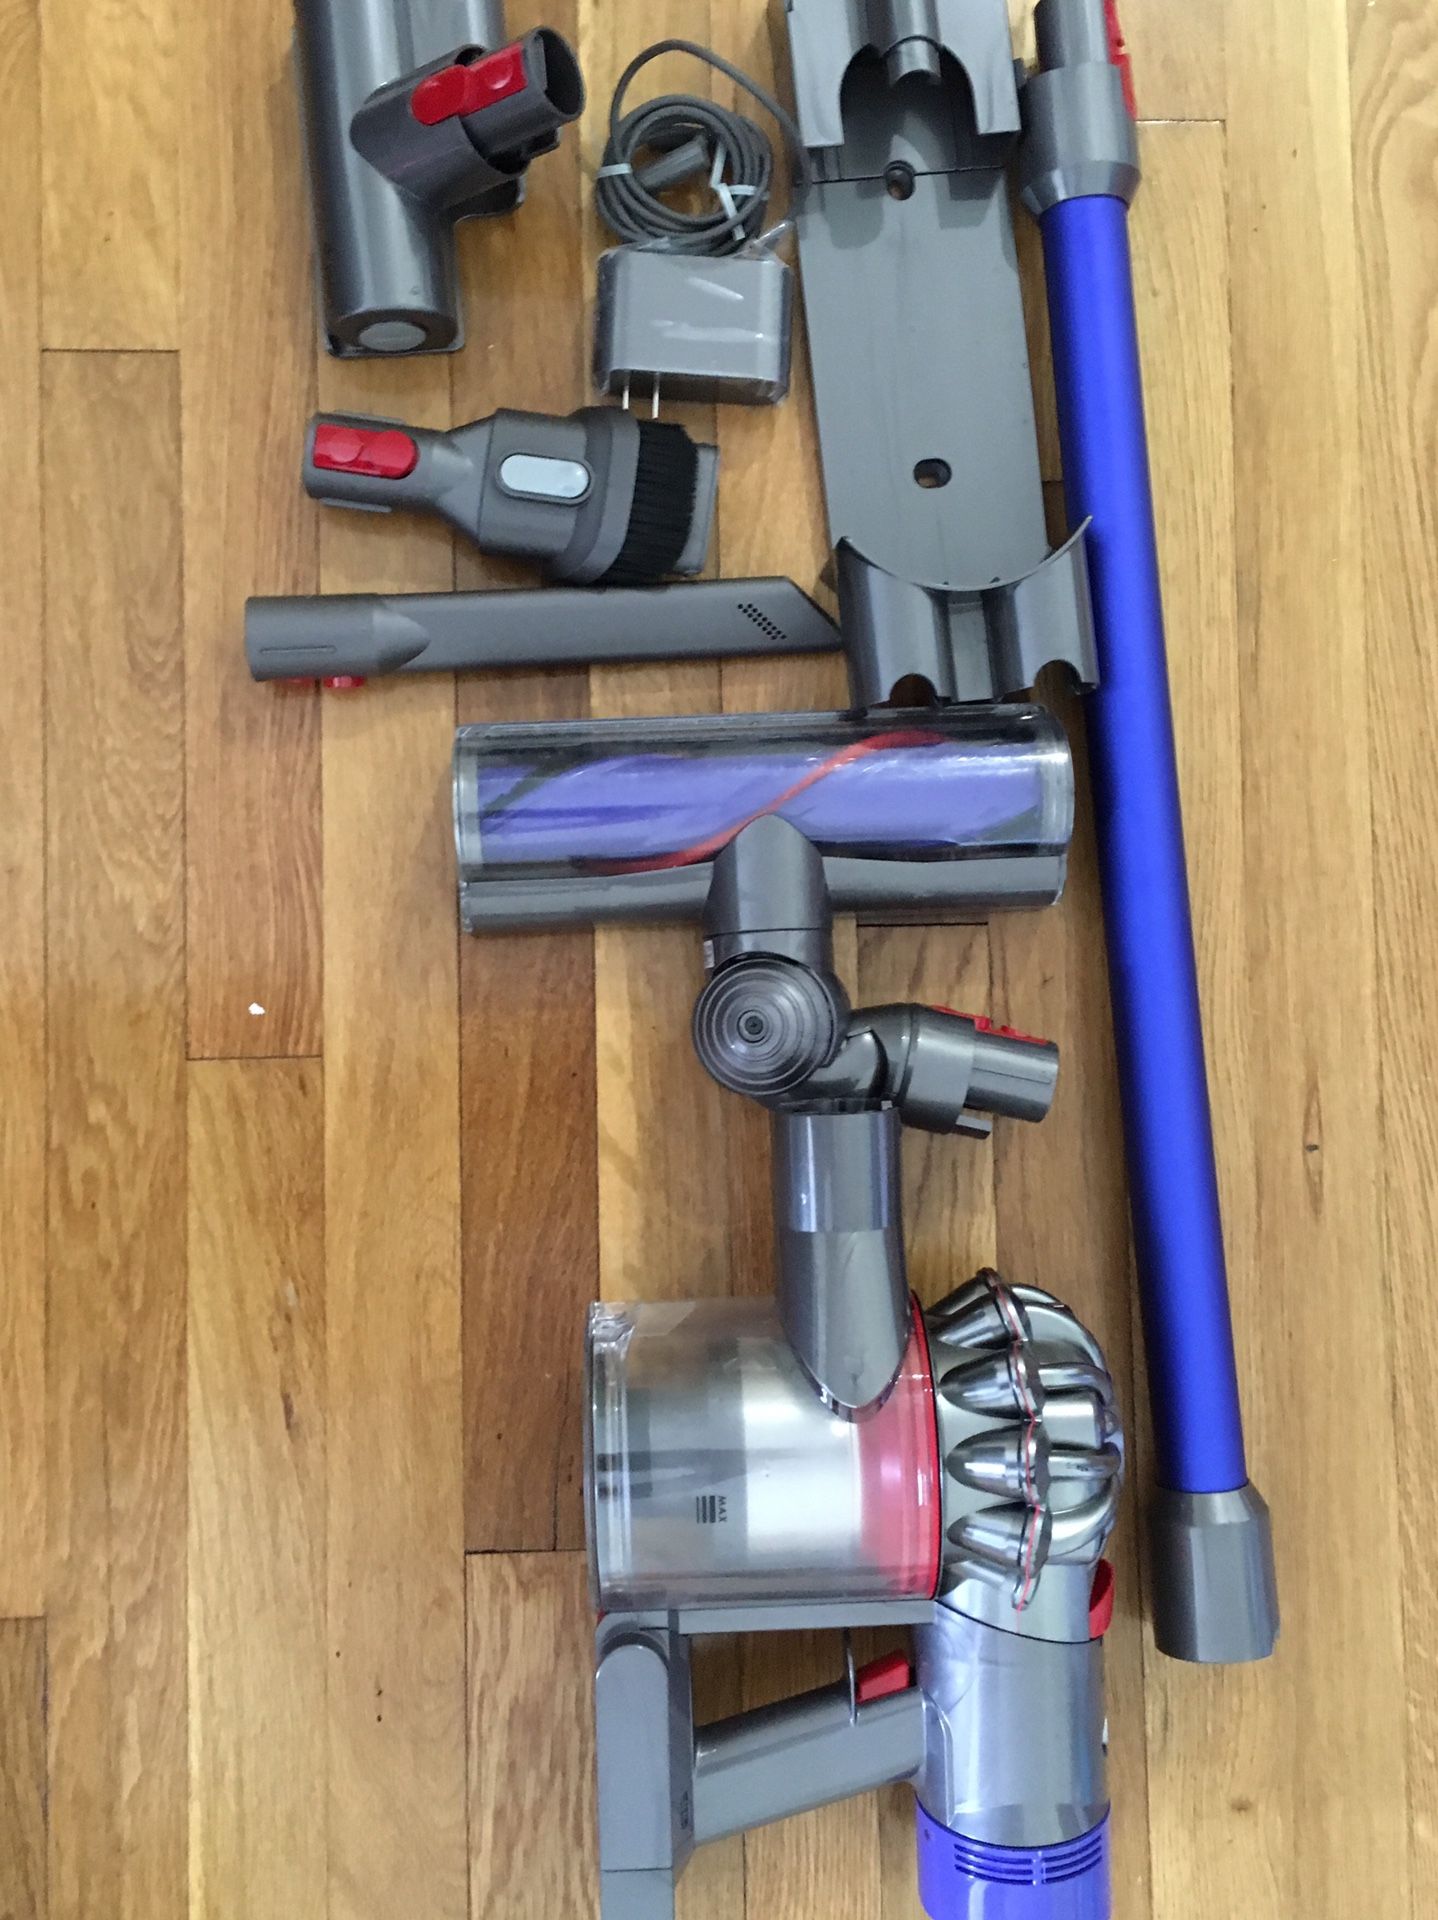 Dyson v8 Animal cordless vaccum cleaner - new ( without original box )